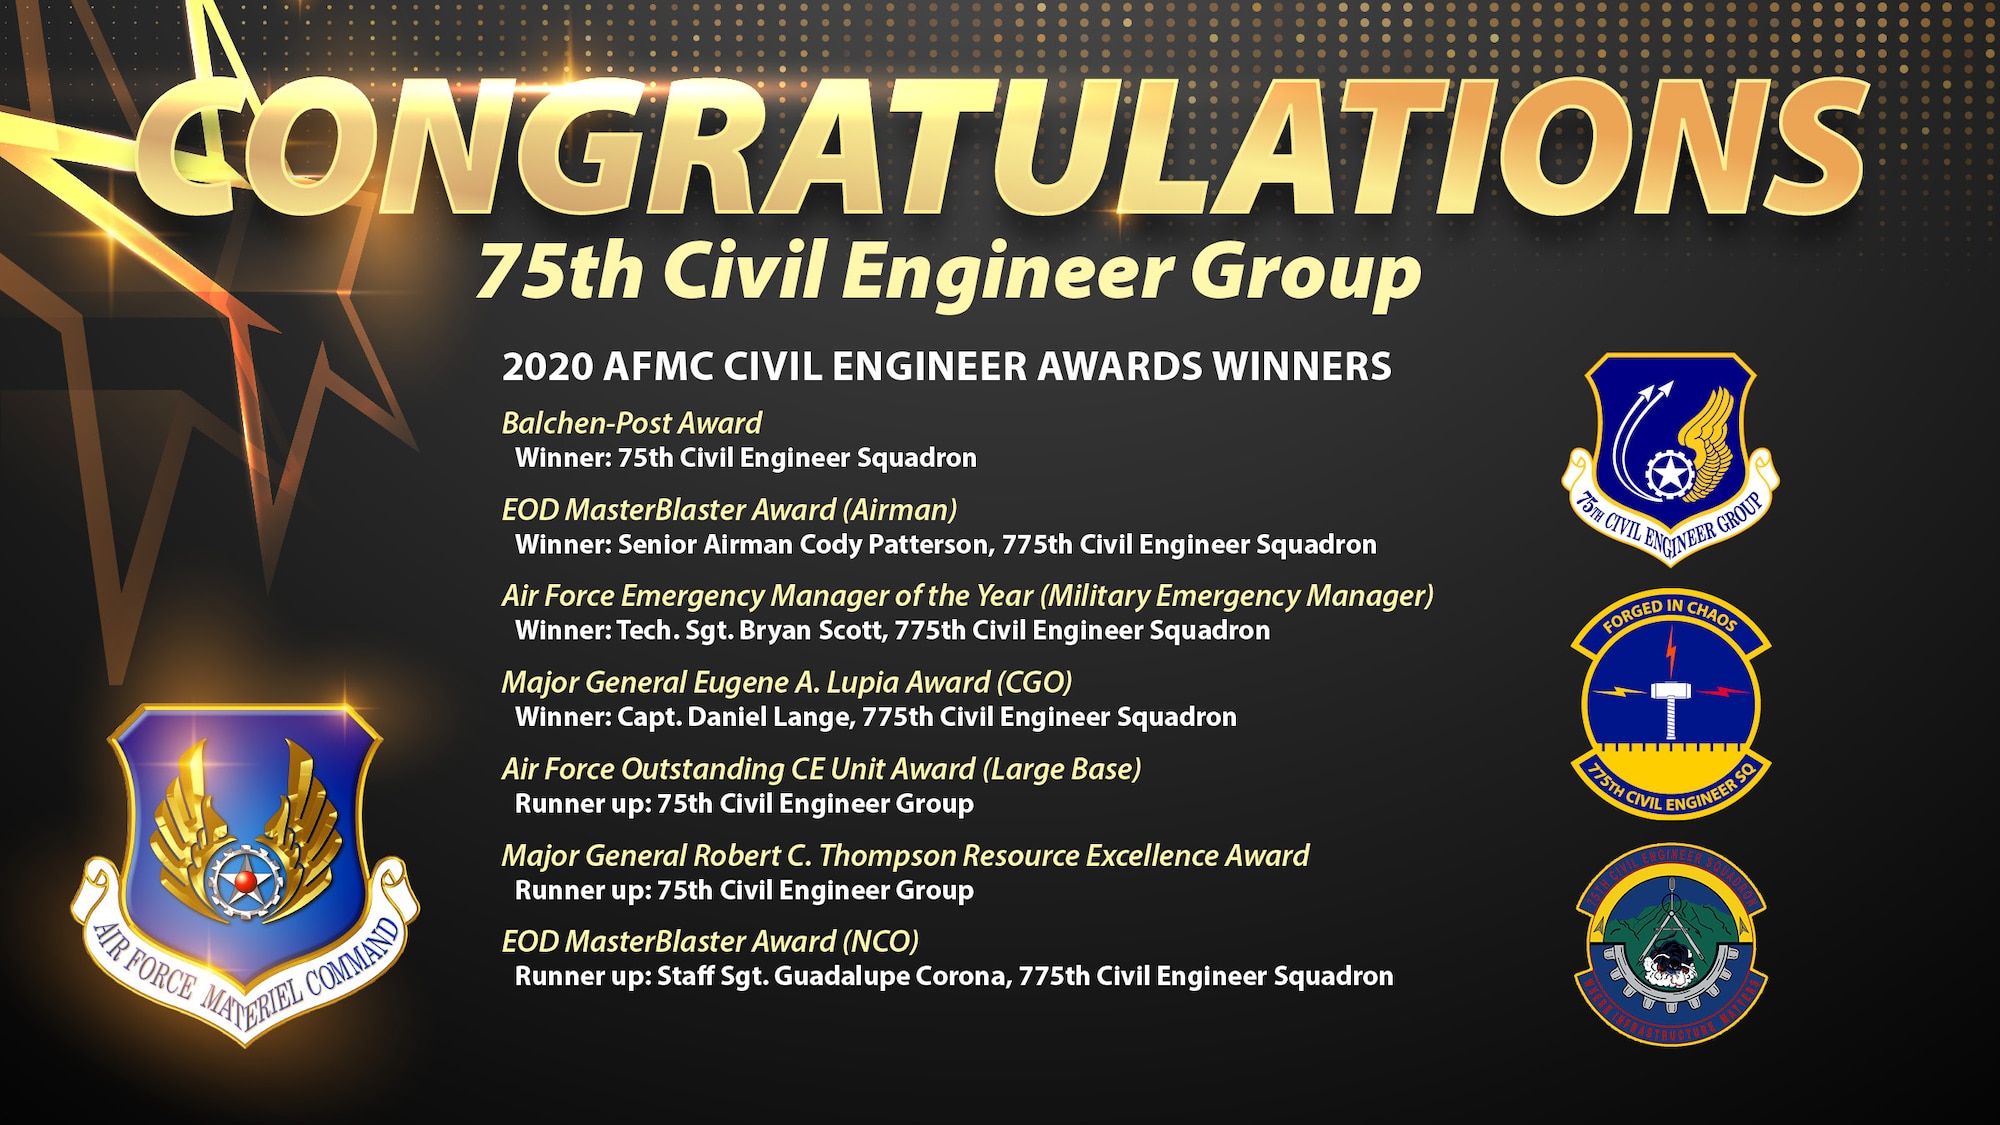 Graphic depicting the 2020 AFMC Civil Engineer Award winners and runners-up.